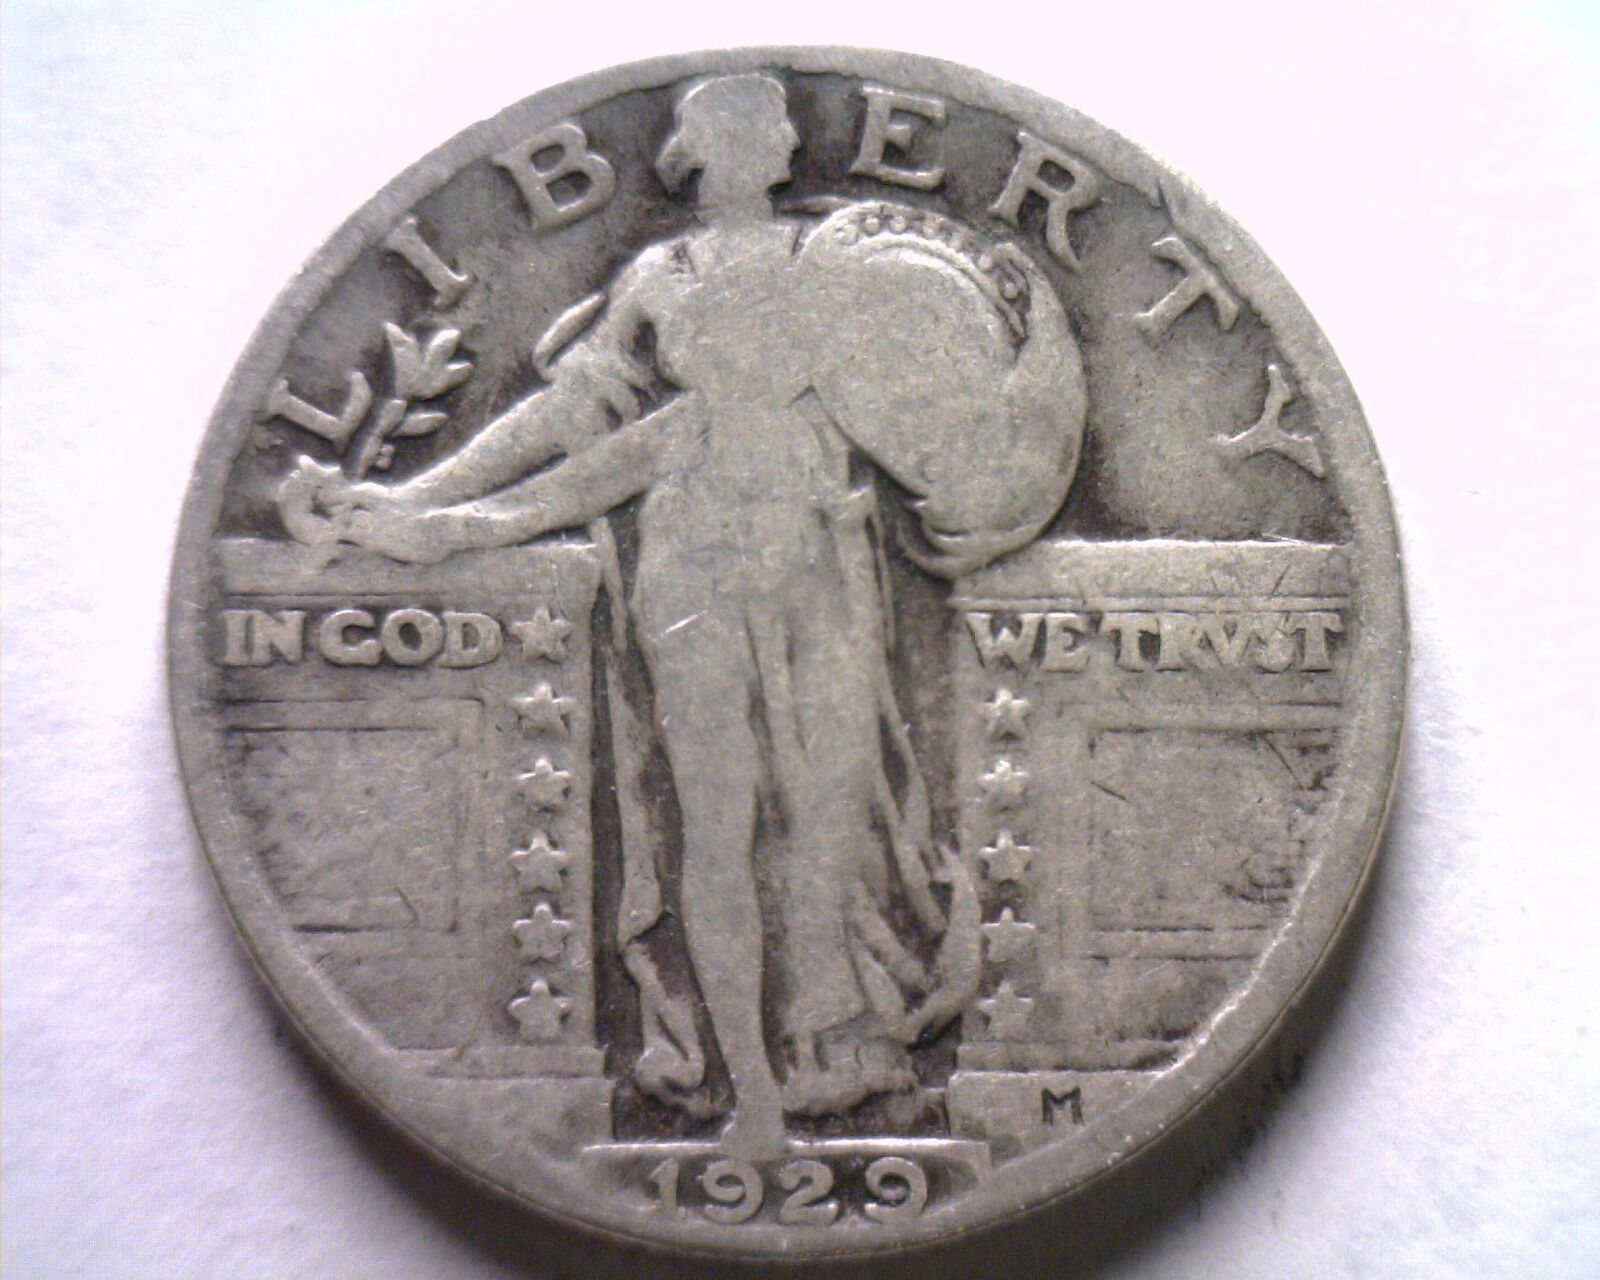 Primary image for 1929 STANDING LIBERTY QUARTER VERY GOOD+ VG+ NICE ORIGINAL COIN BOBS COINS